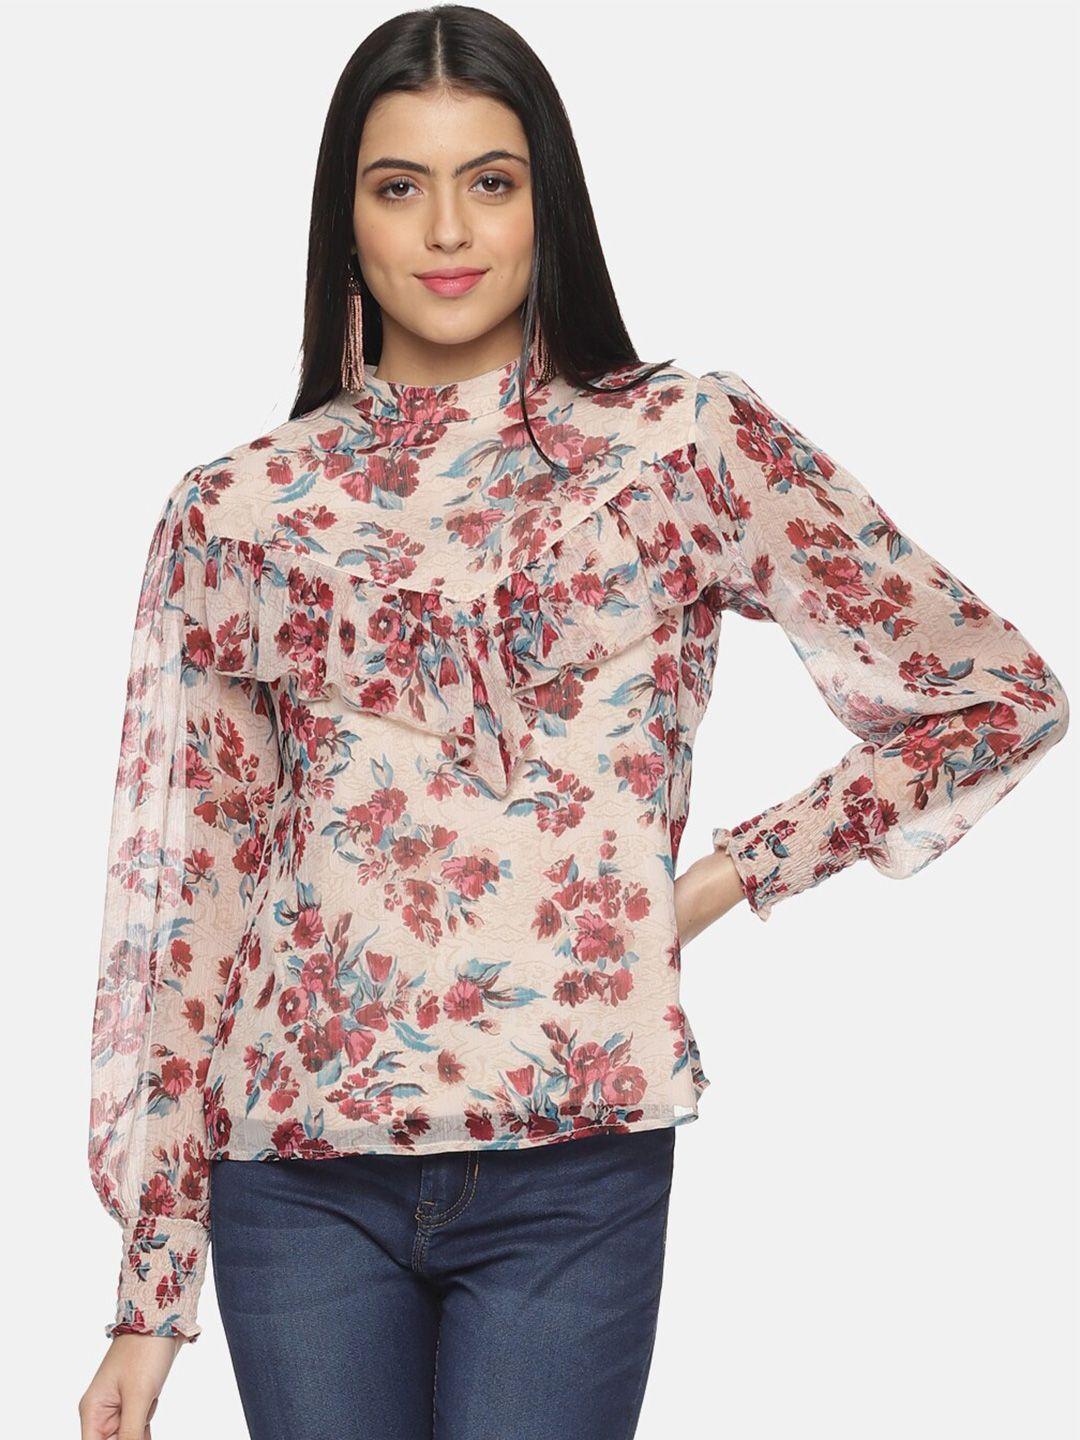 here&now-white-&-red-floral-printed-ruffles-chiffon-top